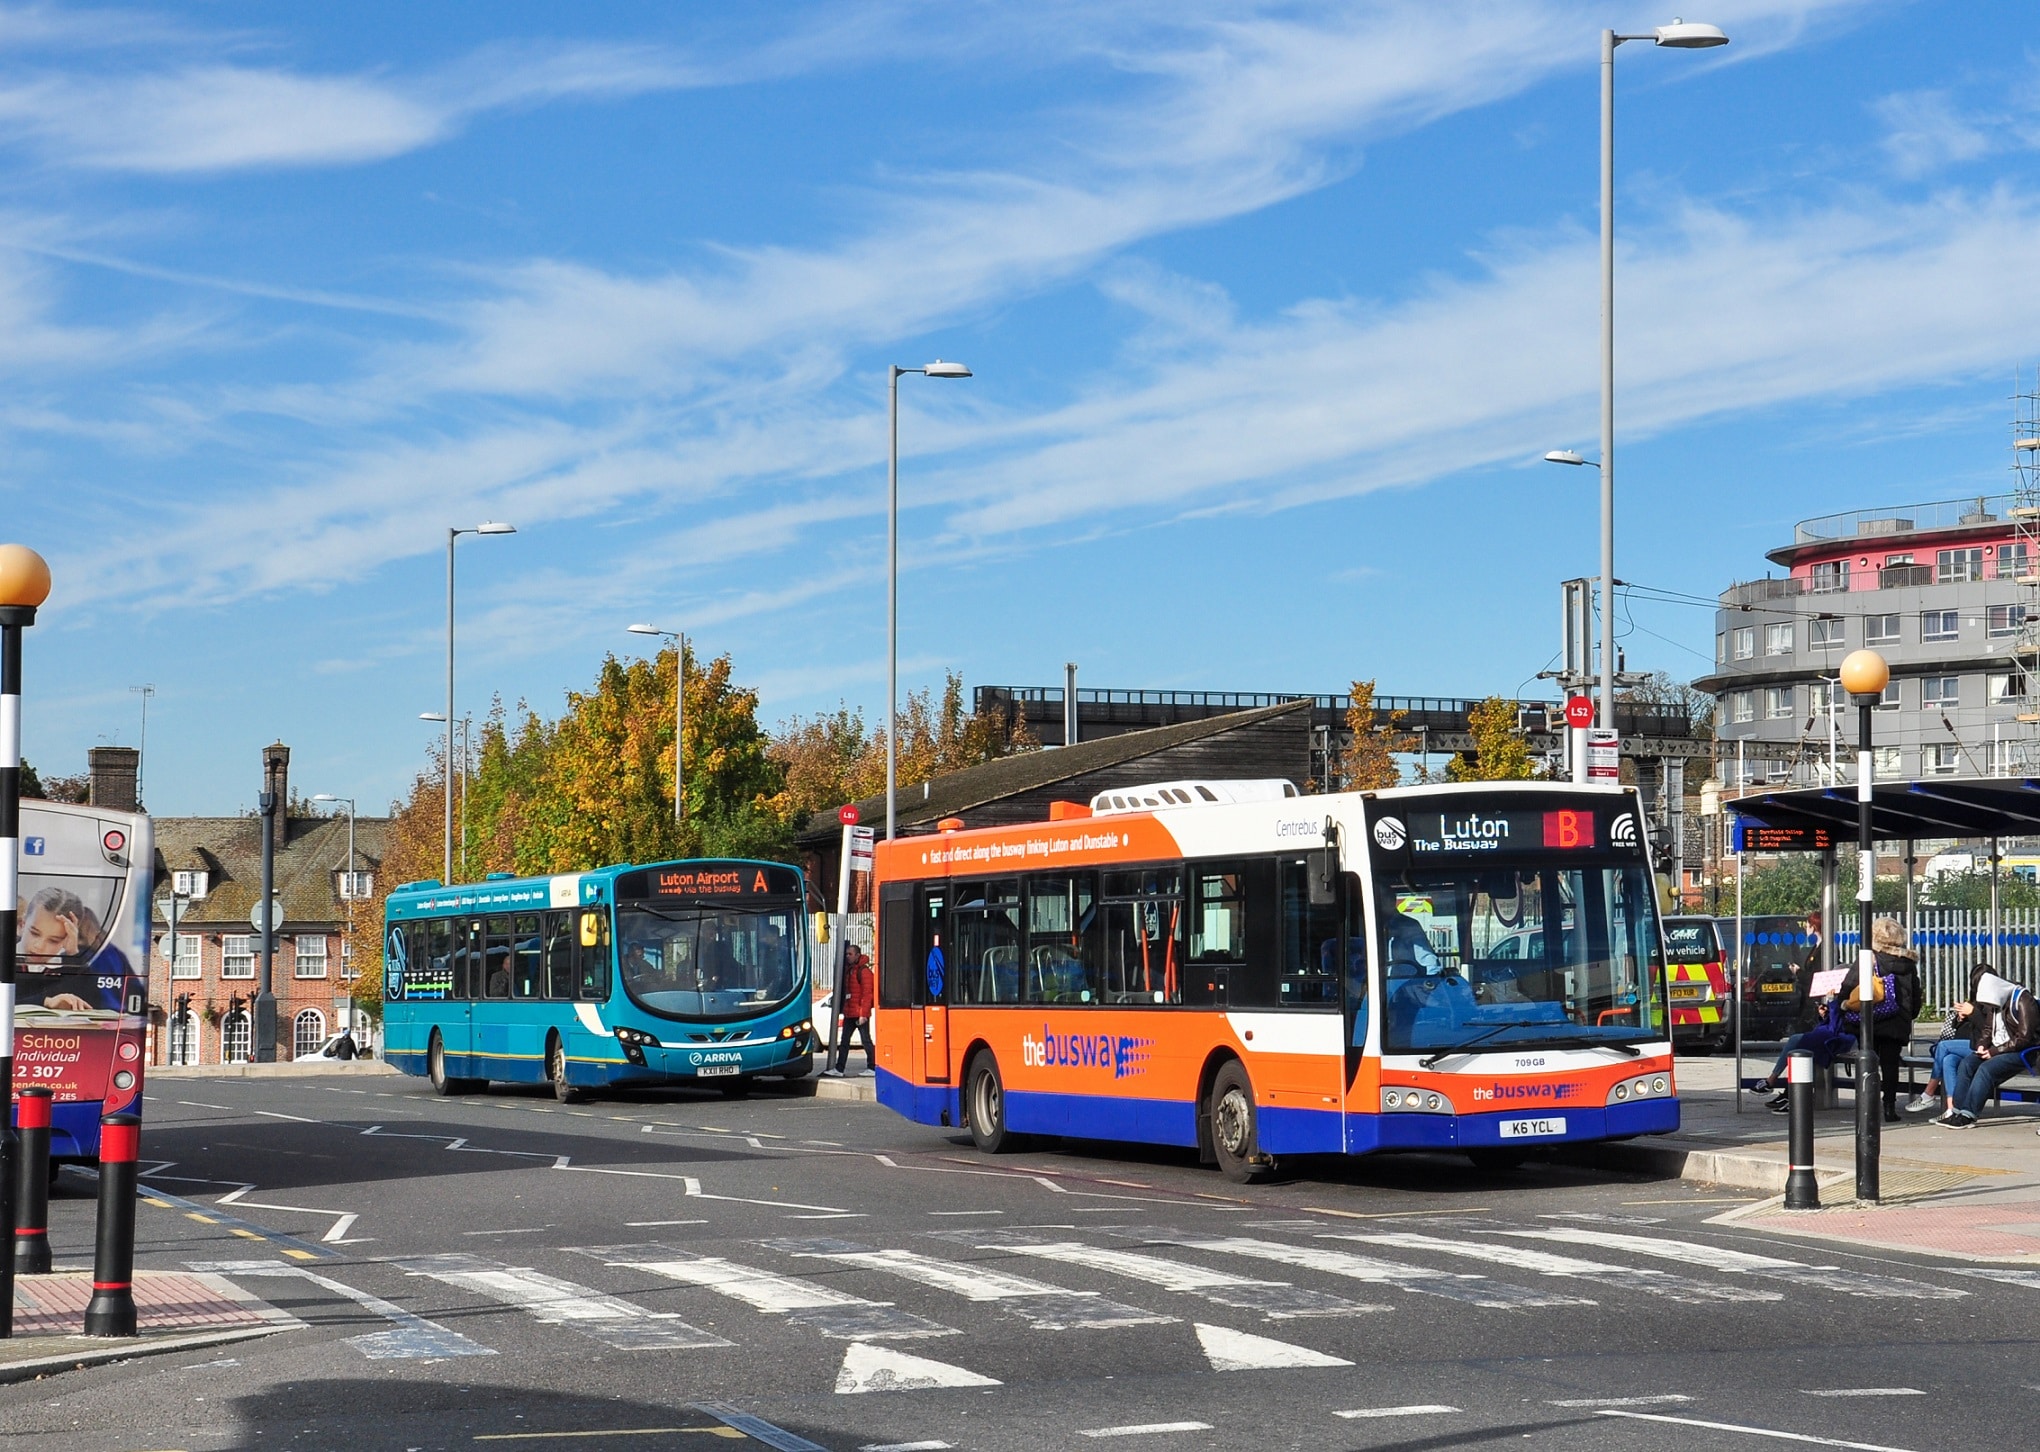 Bus service levels in England should be lower, says DfT